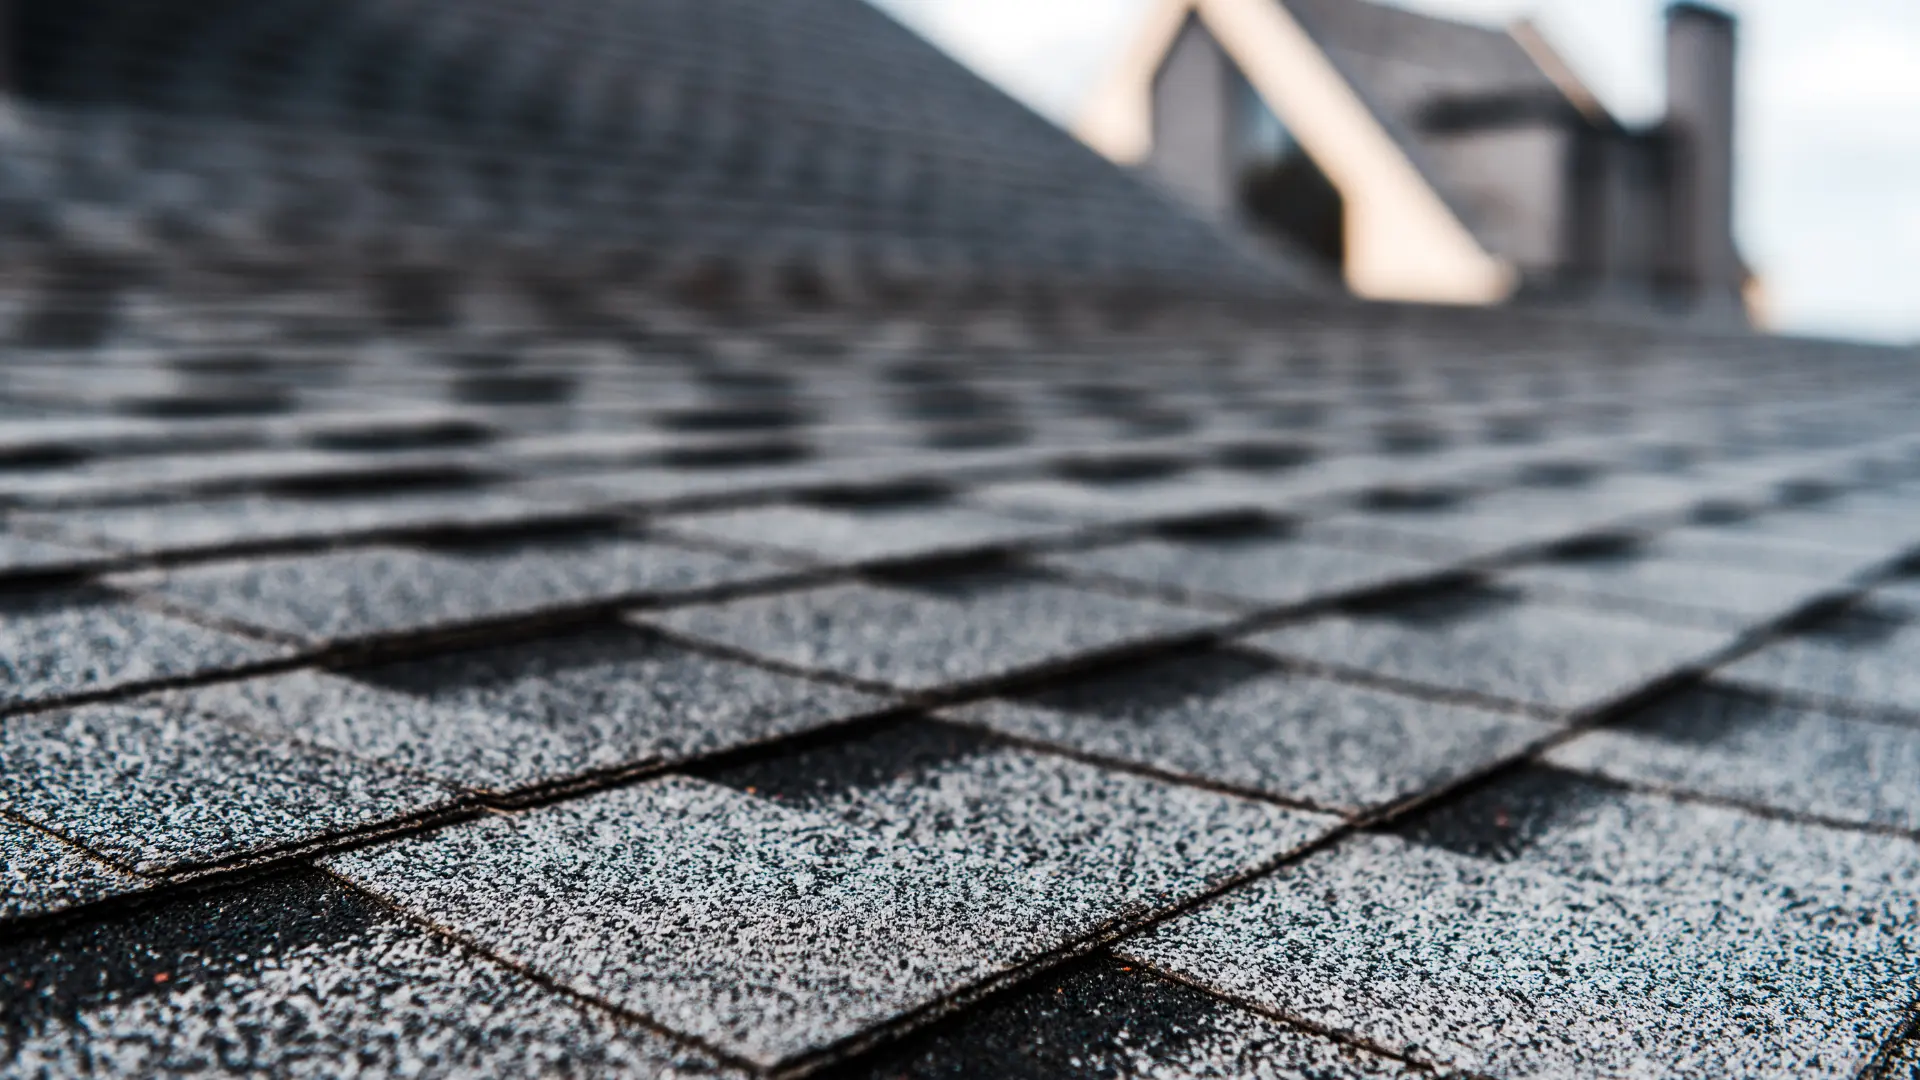 Does the color of your shingles make a difference?